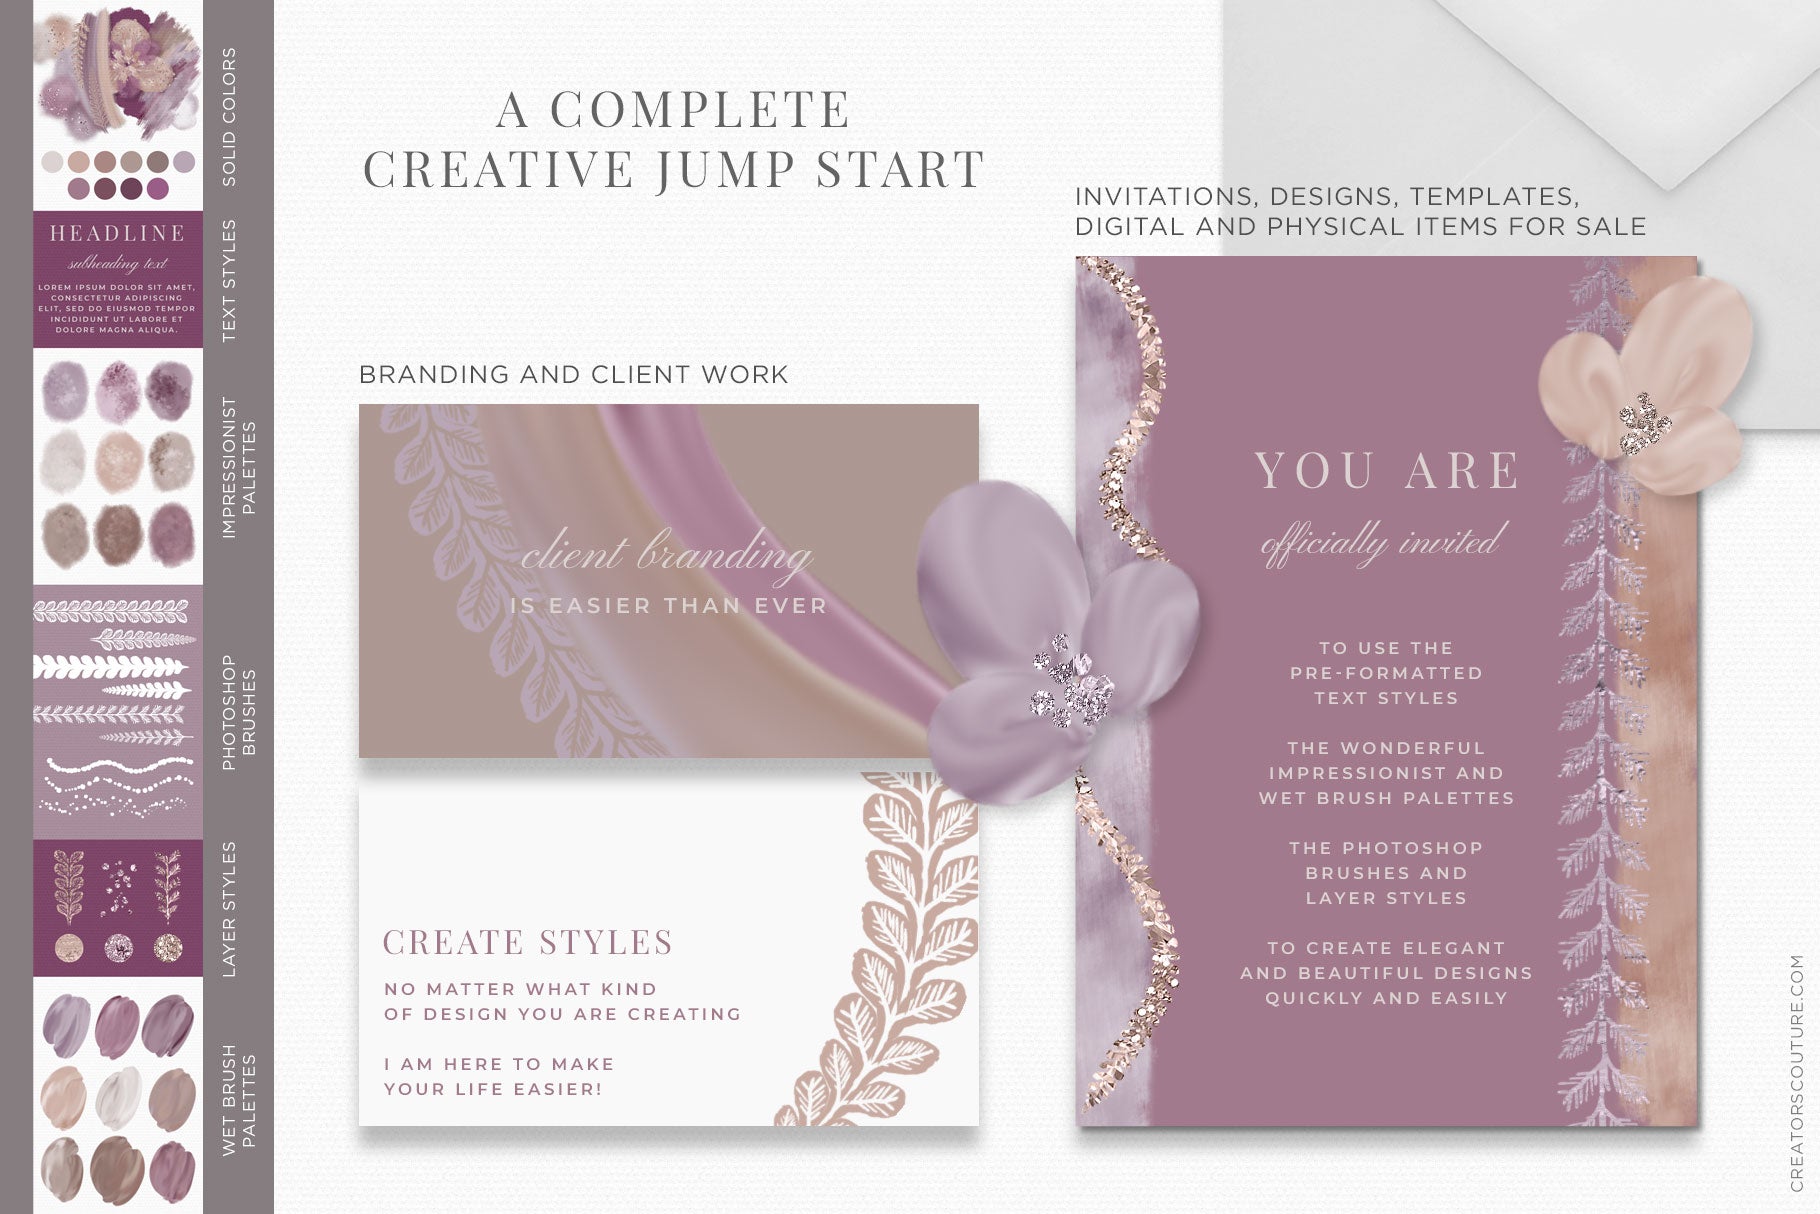 Style Start "Enchanted Ferns" | Complete Creative Toolkit & Style Guide - Creators Couture